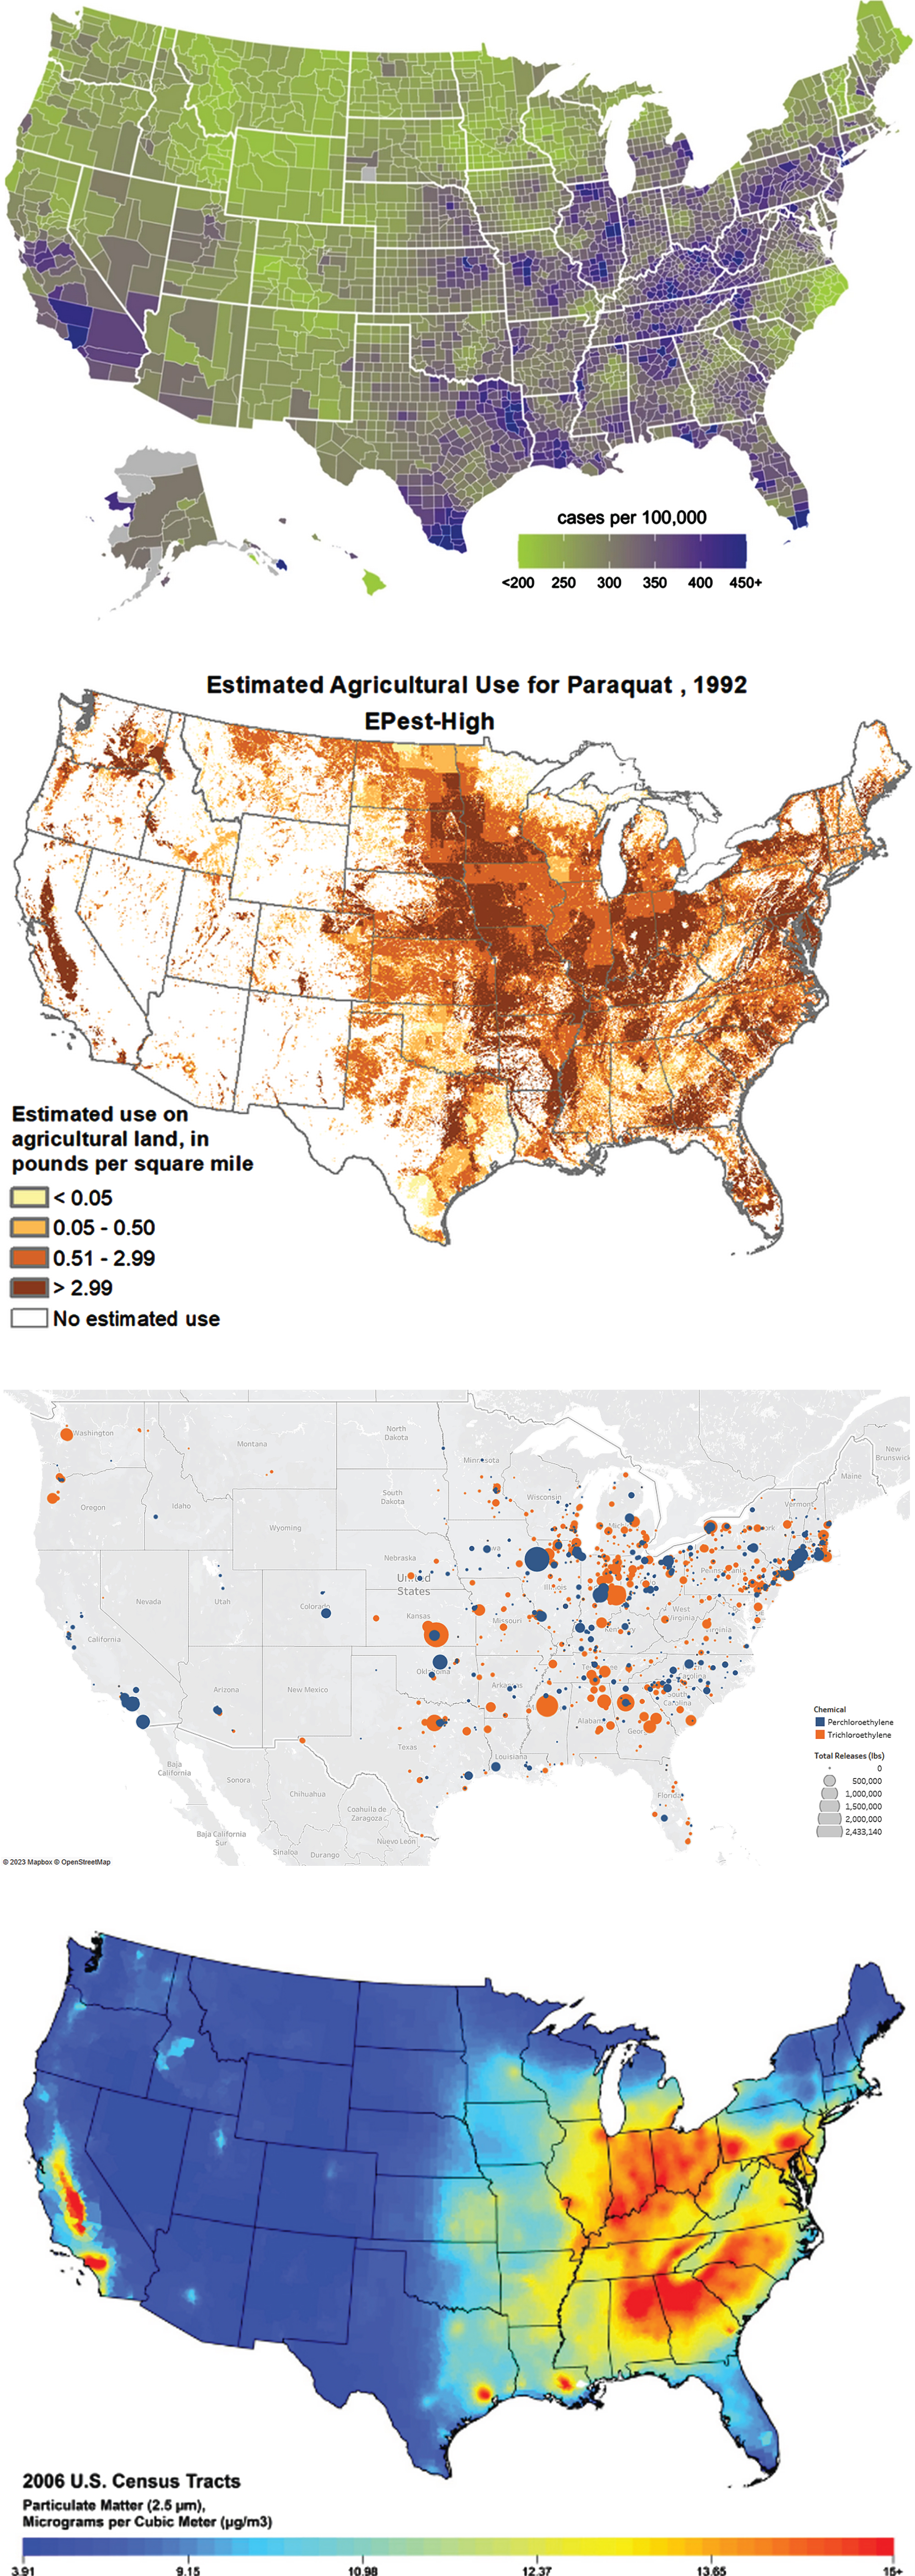 A) Incidence of Parkinson’s disease in the U.S., 2012 [49]. B) Estimated annual use of paraquat in the U.S., 1992 [50]. Map of release of trichloroethylene (orange) and perchloroethylene (in blue) in the U.S, 1987. Map courtesy of Meghan Pawlik, University Rochester, based on data from the Toxic Release Inventory from the U.S. Environmental Protection Agency. D) Map of particulate matter smaller than 2.5 microns in the U.S., 2006 [51].